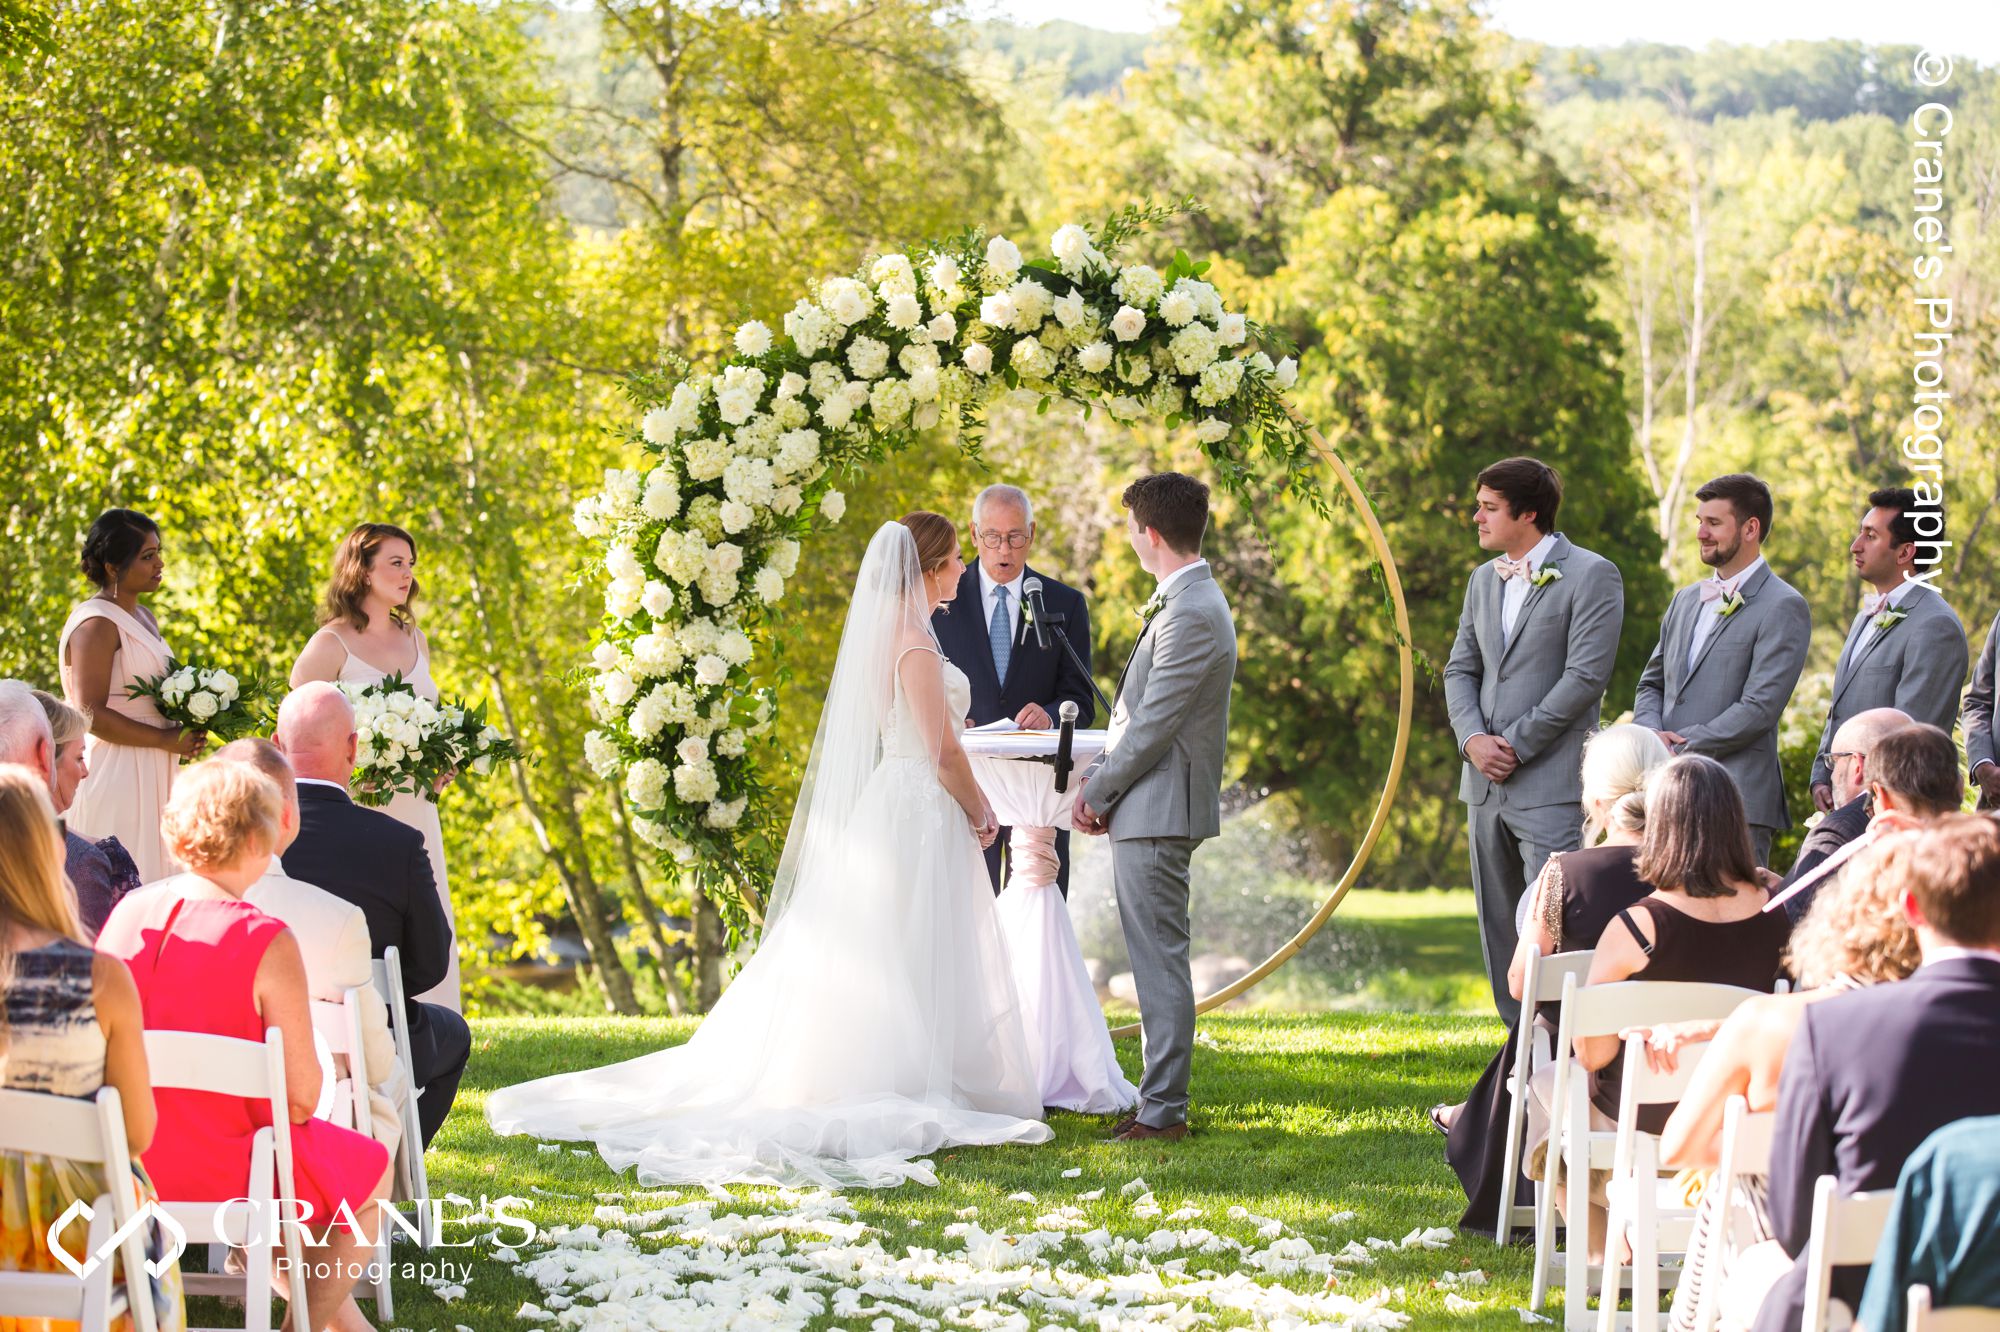 An outdoor wedding ceremony with curricular flower arch at Big Foot Country Club at Lake Geneva